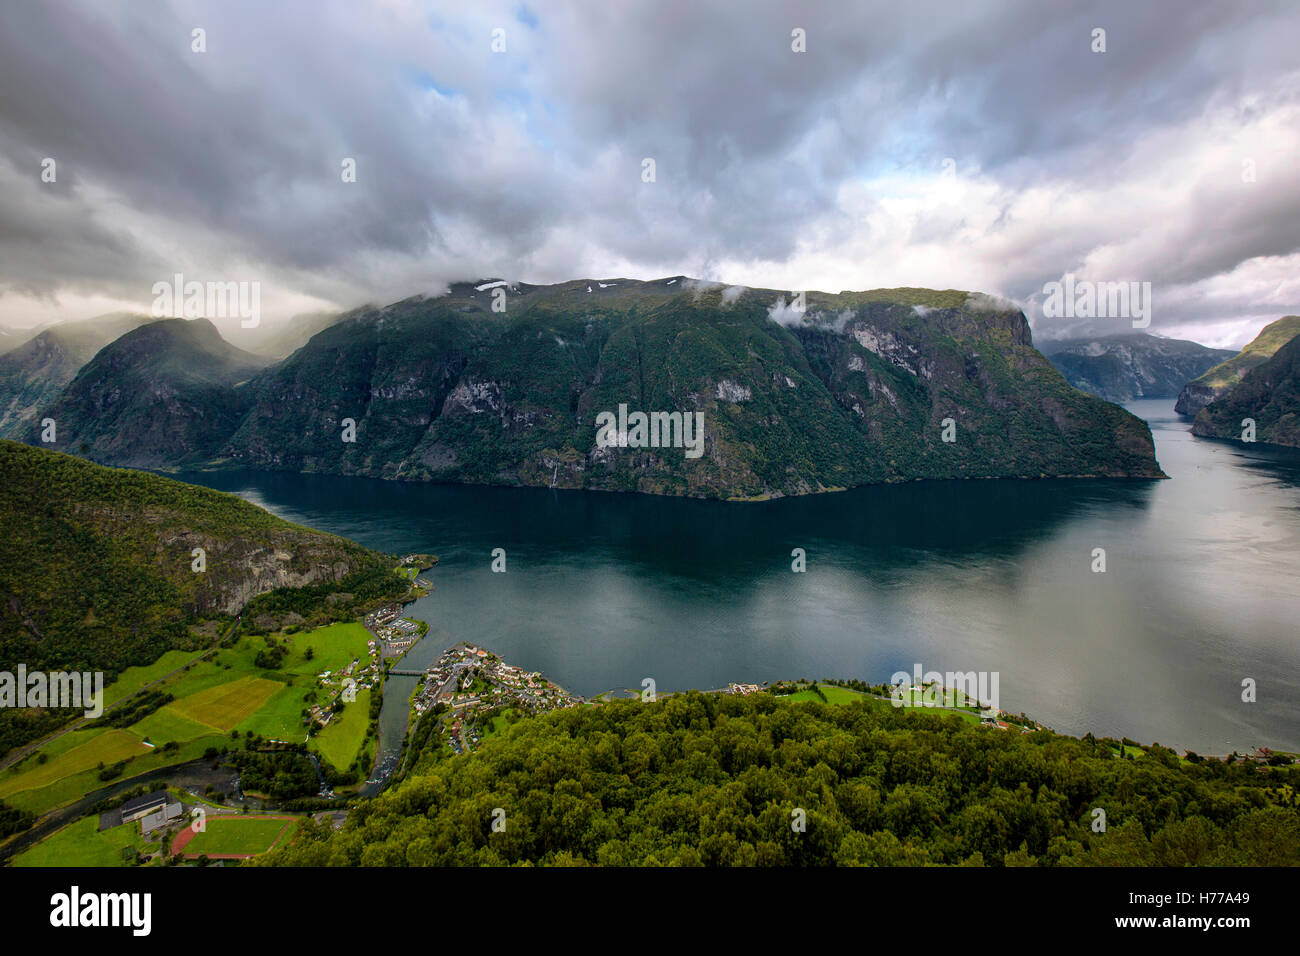 Aerial View of Aurlandsfjord From Stegastein Viewpoint, Sogn og Fjordane, Norway Stock Photo